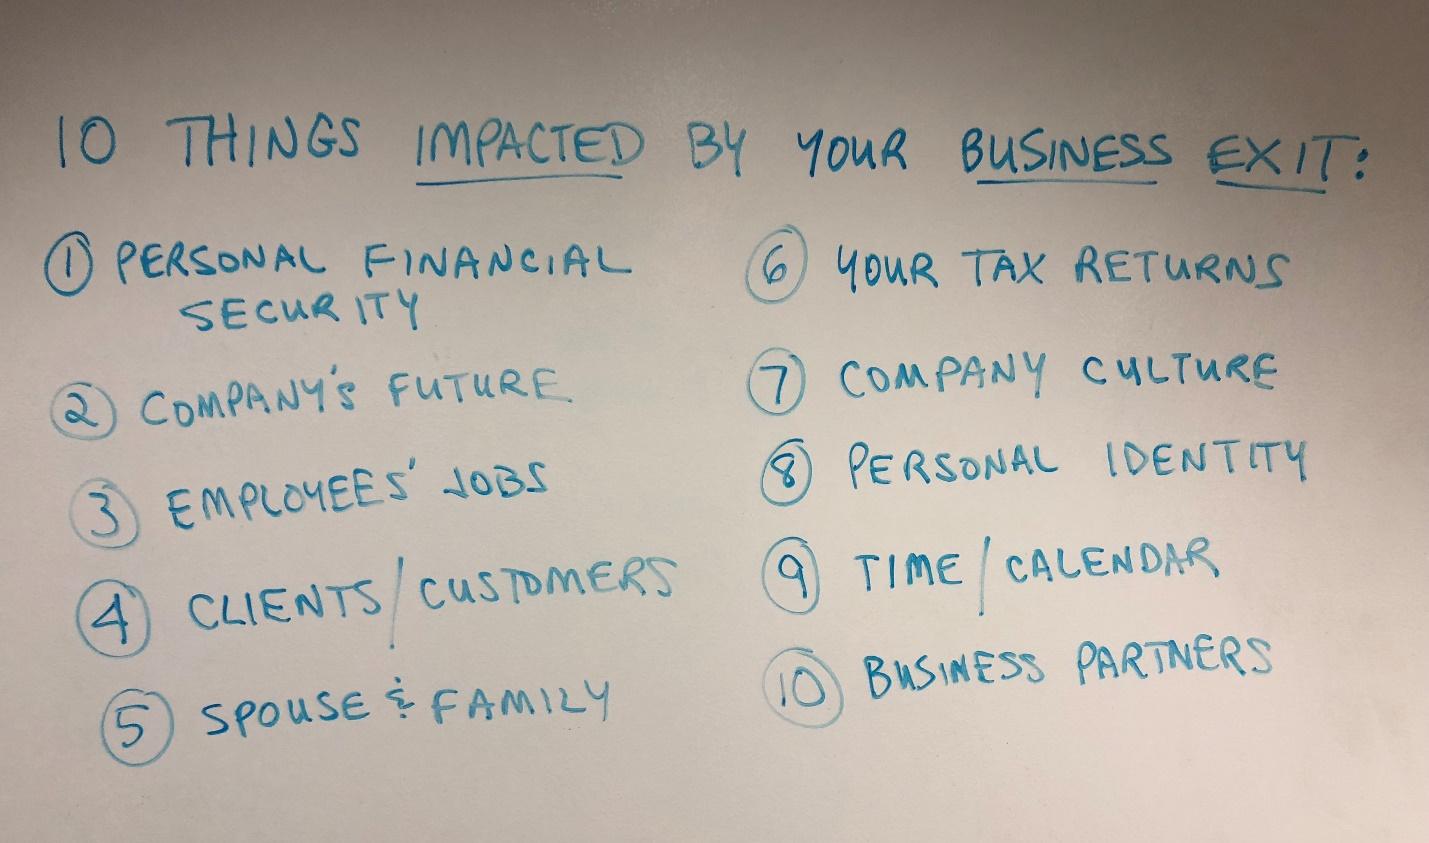 10 Things Impacted by Your Business Exit